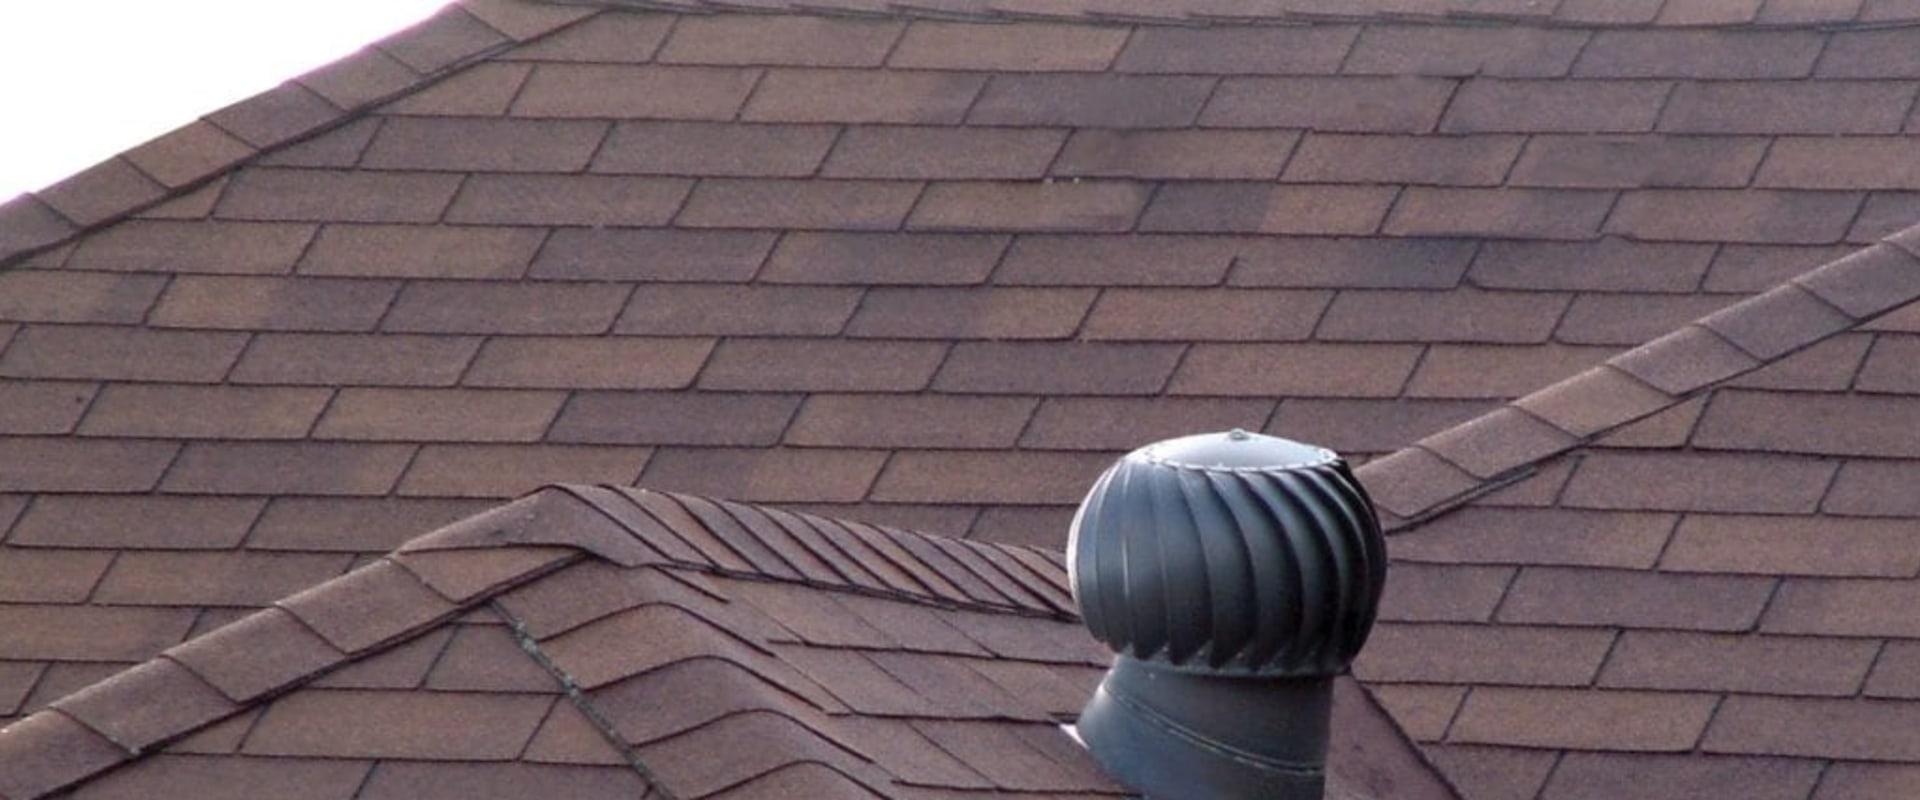 Why install roof vents?